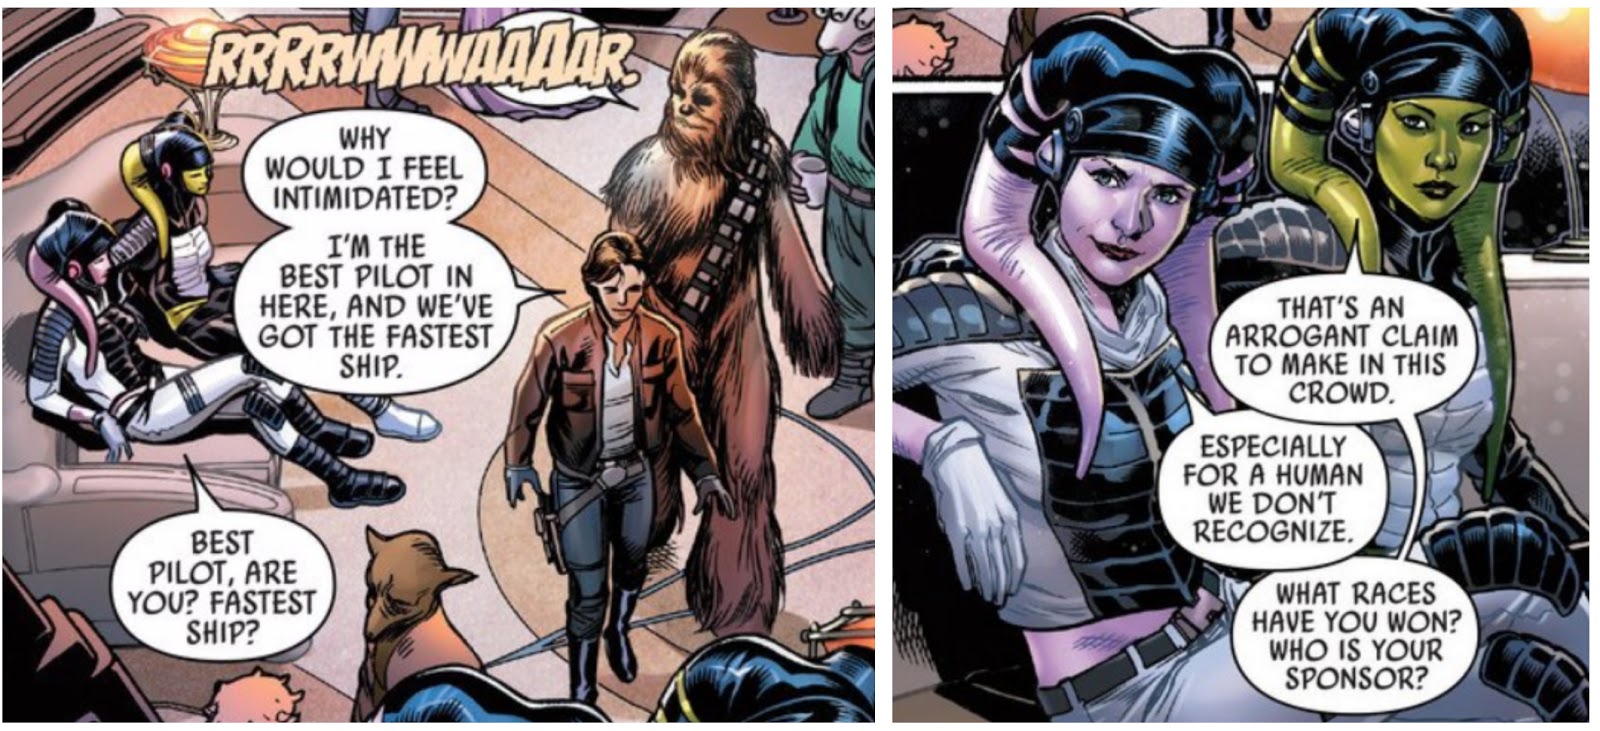 Marvel’s New Han Solo Comic Shows Star Wars’ Smuggler At His Cocky Best